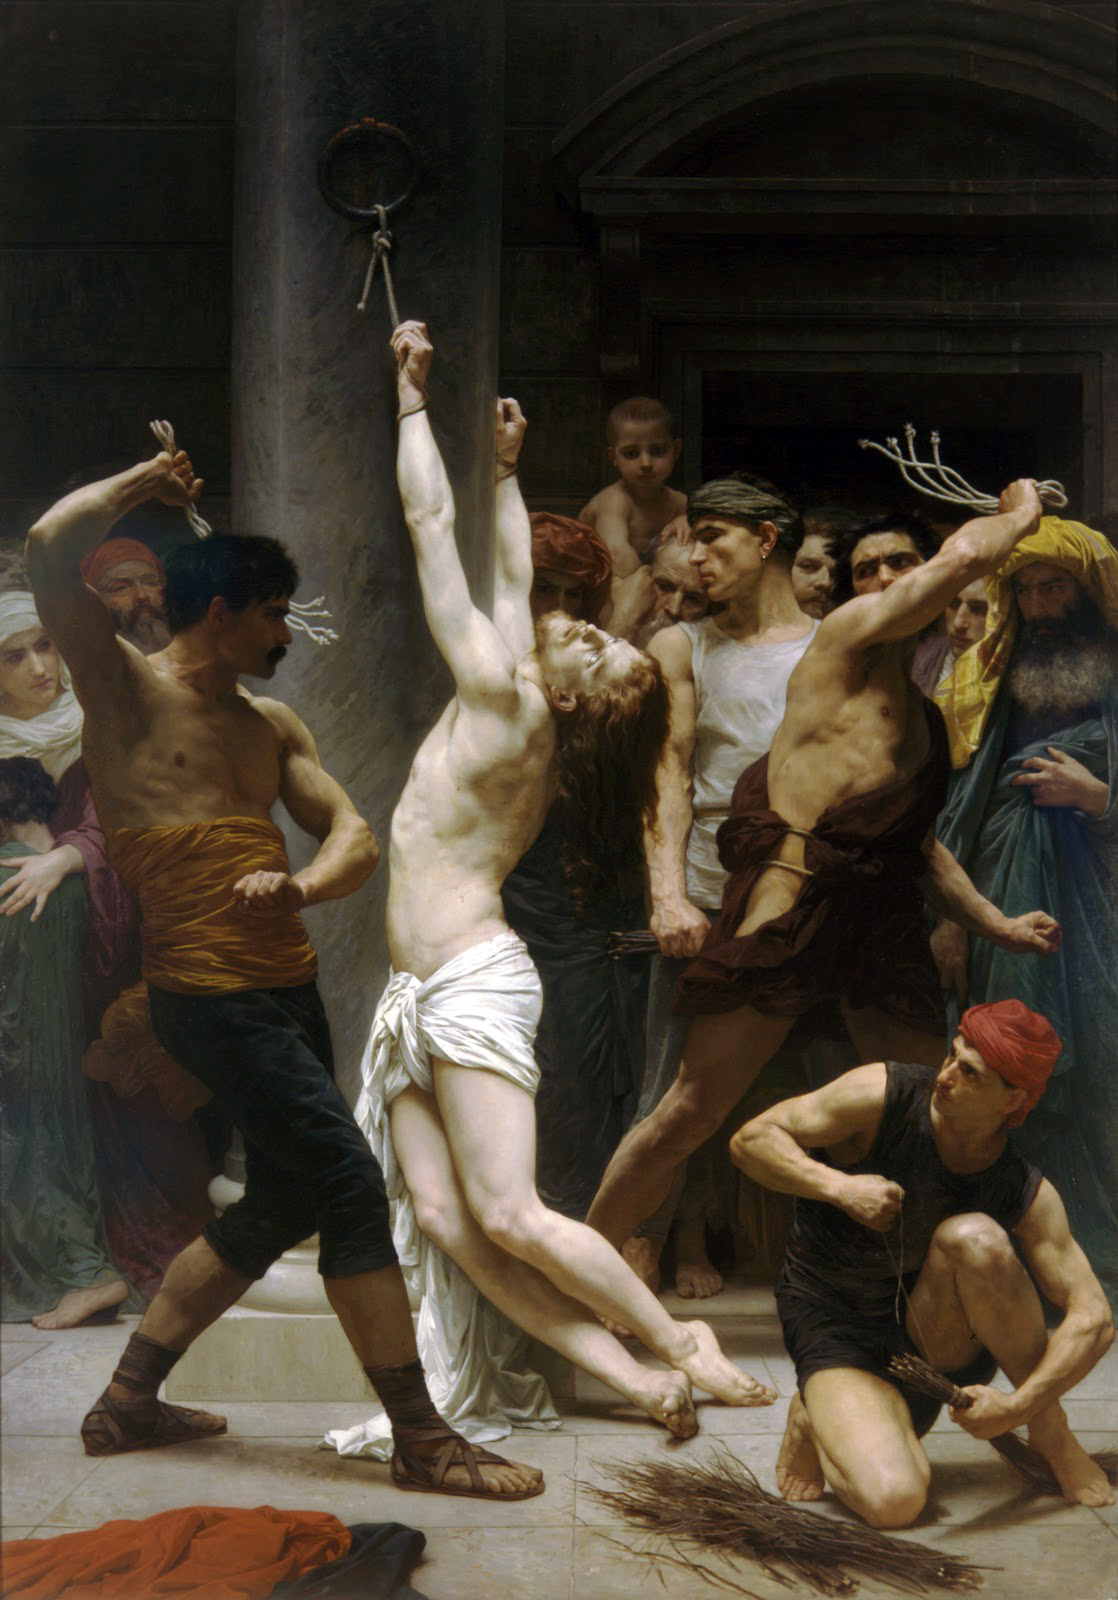 William-Adolphe Bouguereau 1825-1905 - The Flagellation of Our Lord Jesus Christ 1880